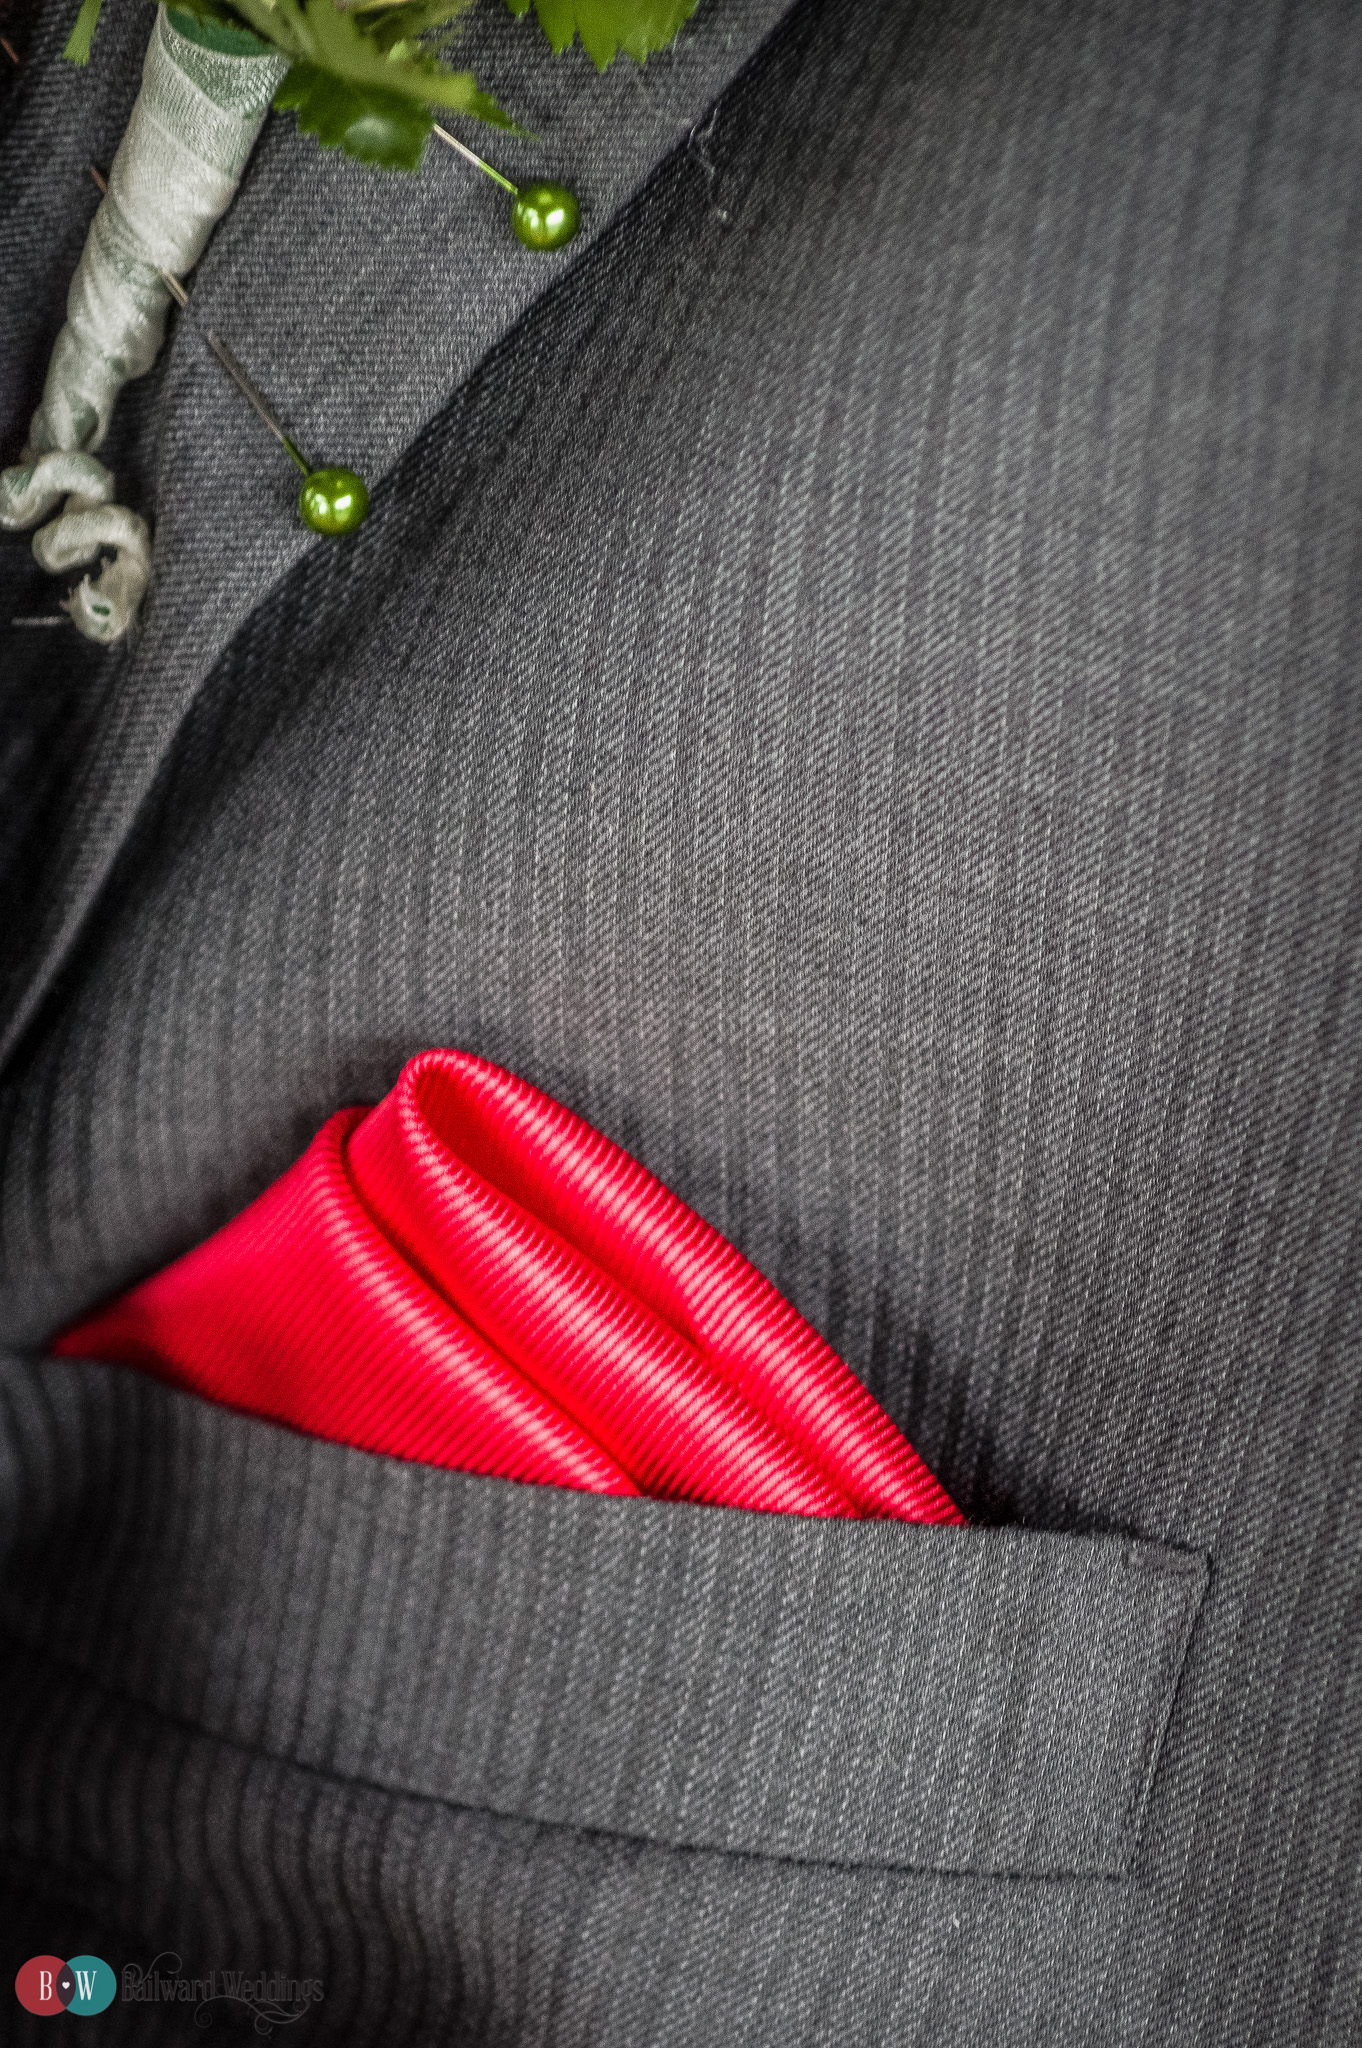 Groom with red pocket square